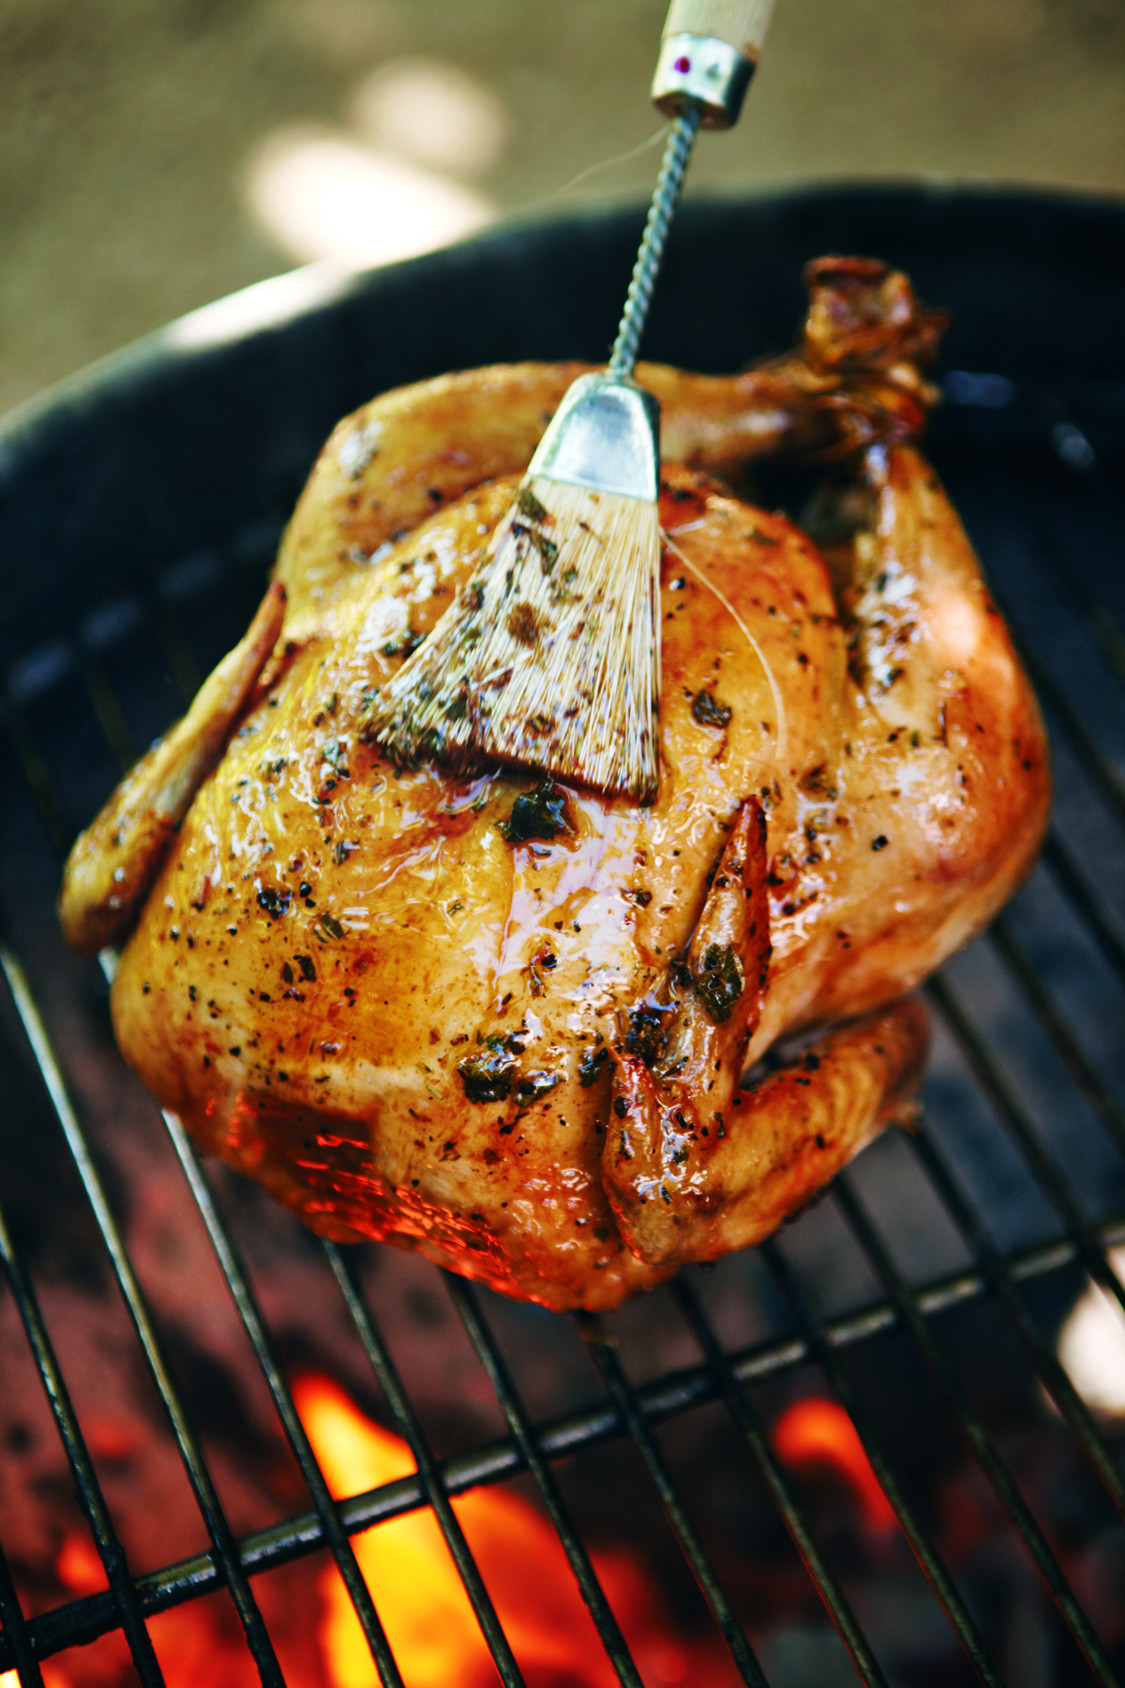 Cooking A Whole Chicken On The Grill
 5 Ways to Grill a Whole Chicken